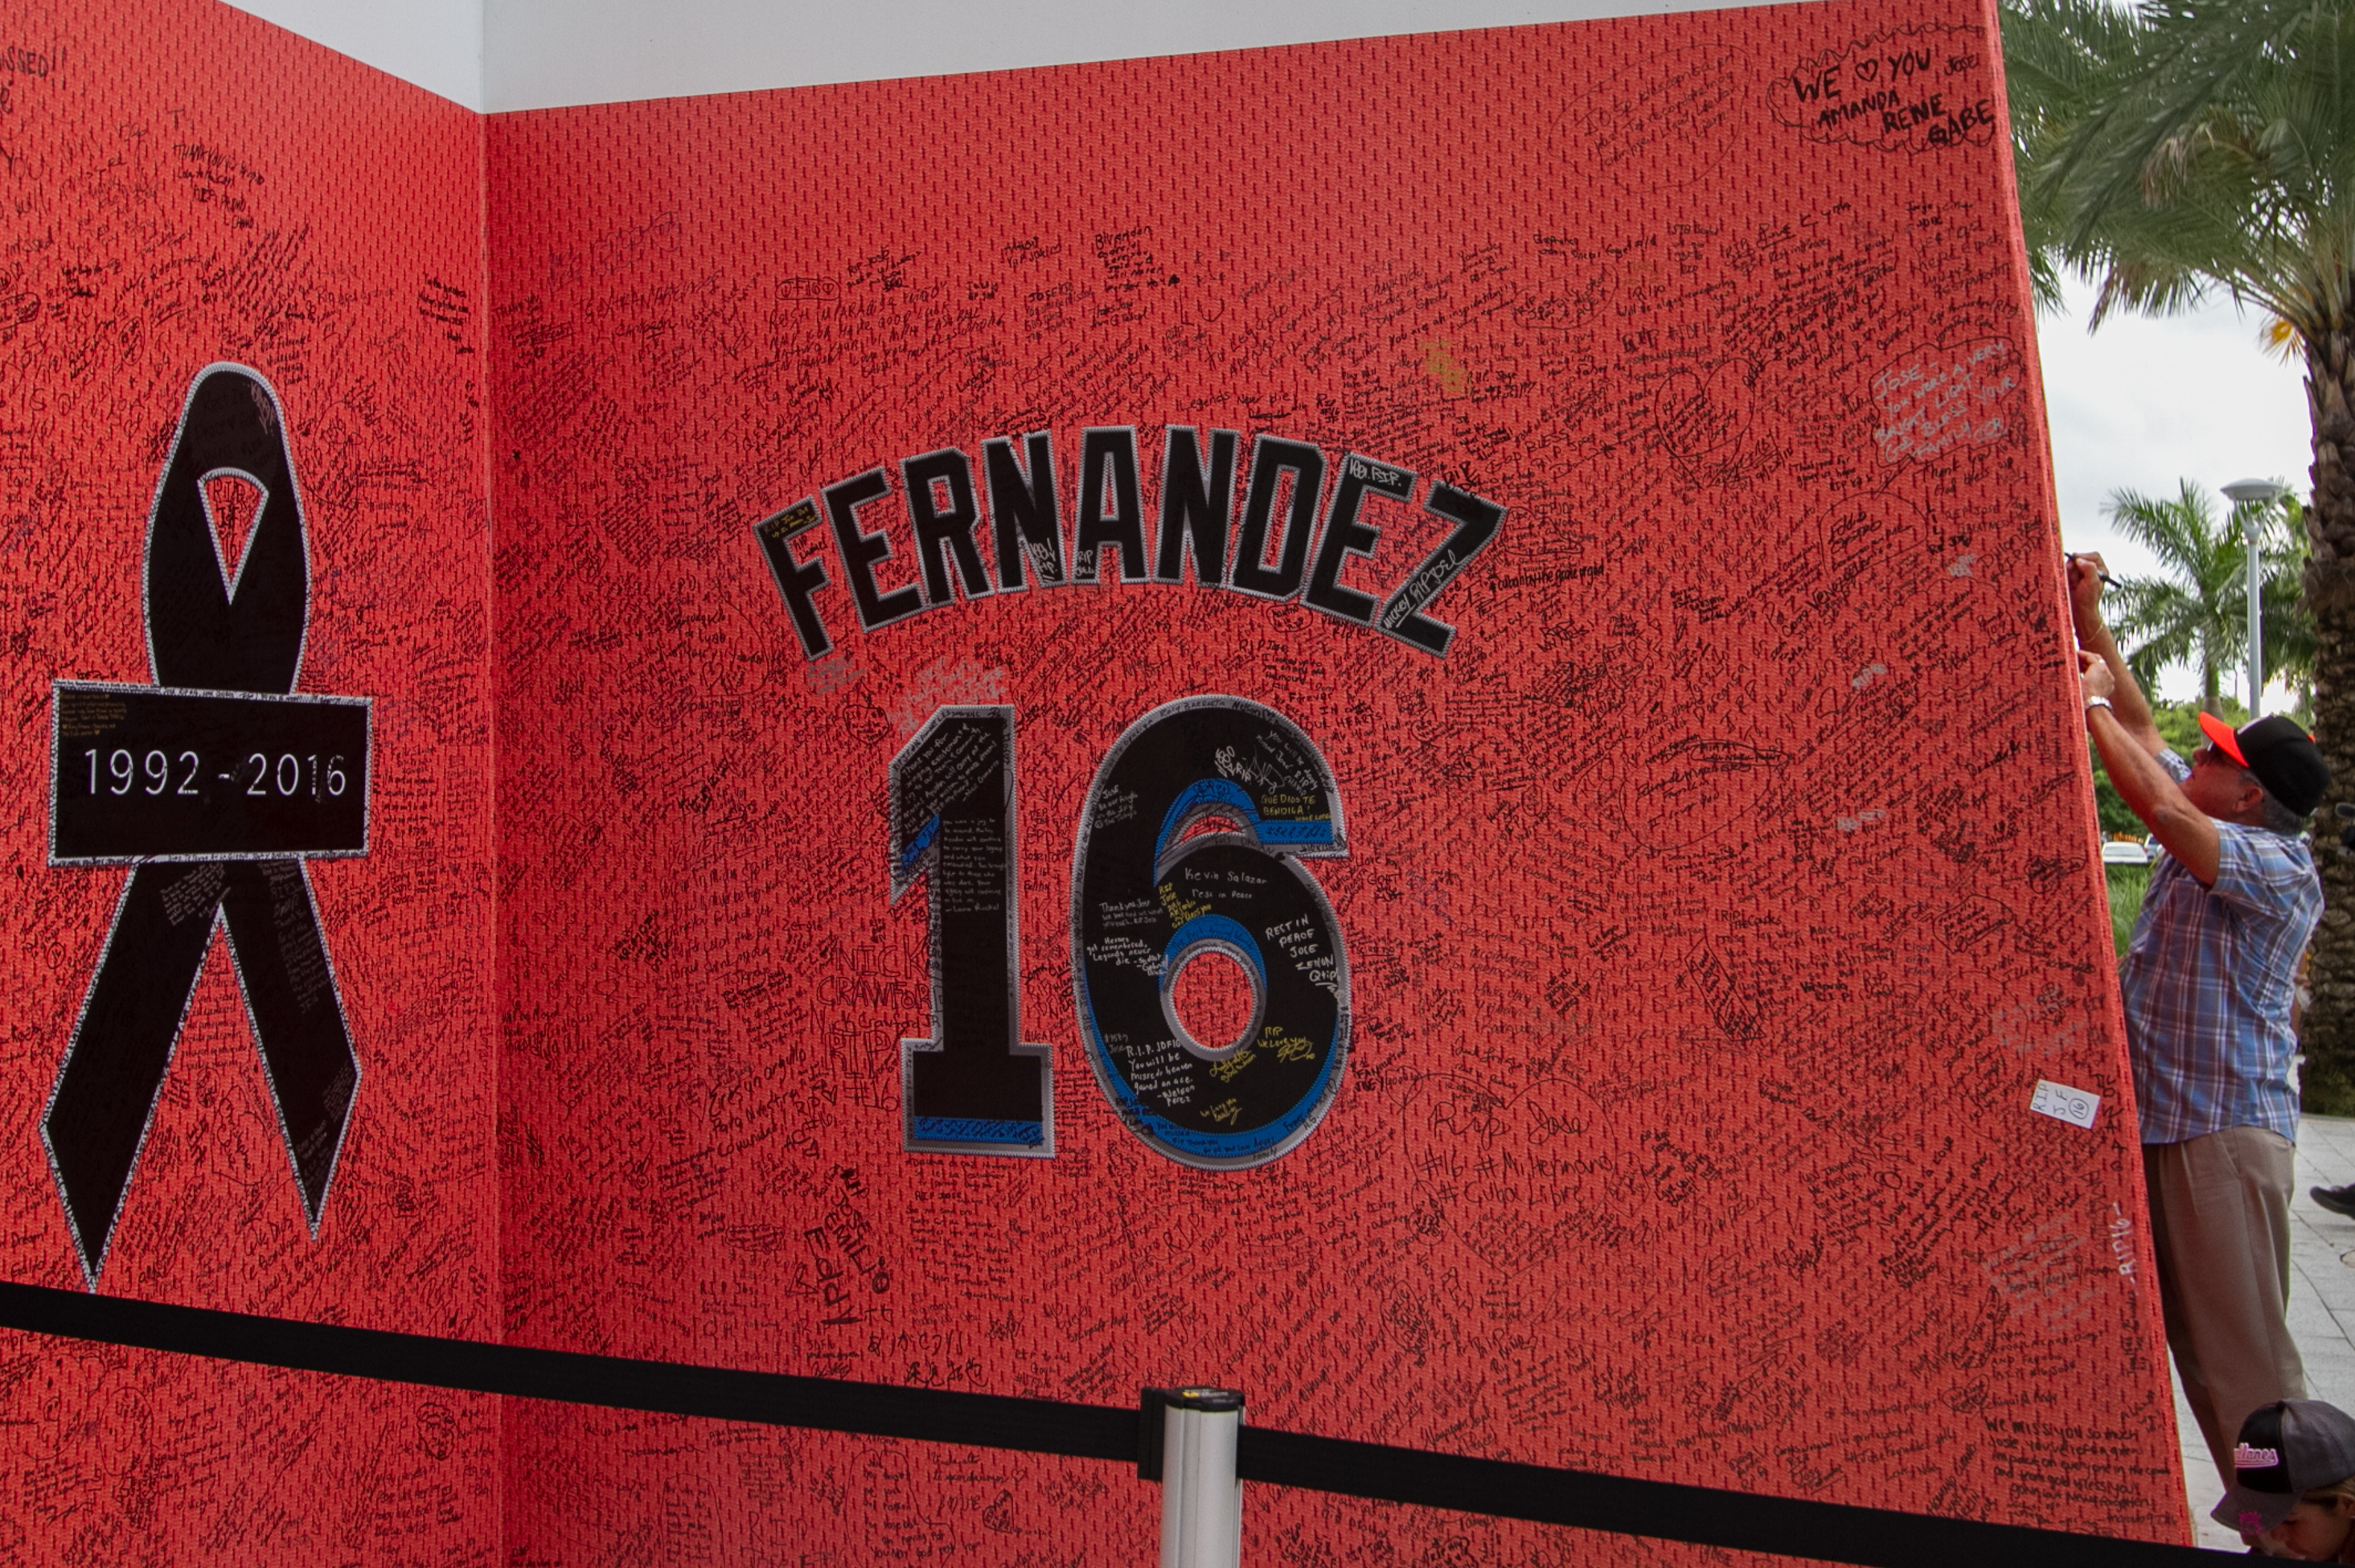 Marlins to Build Jose Fernandez Statue at Stadium Before End of